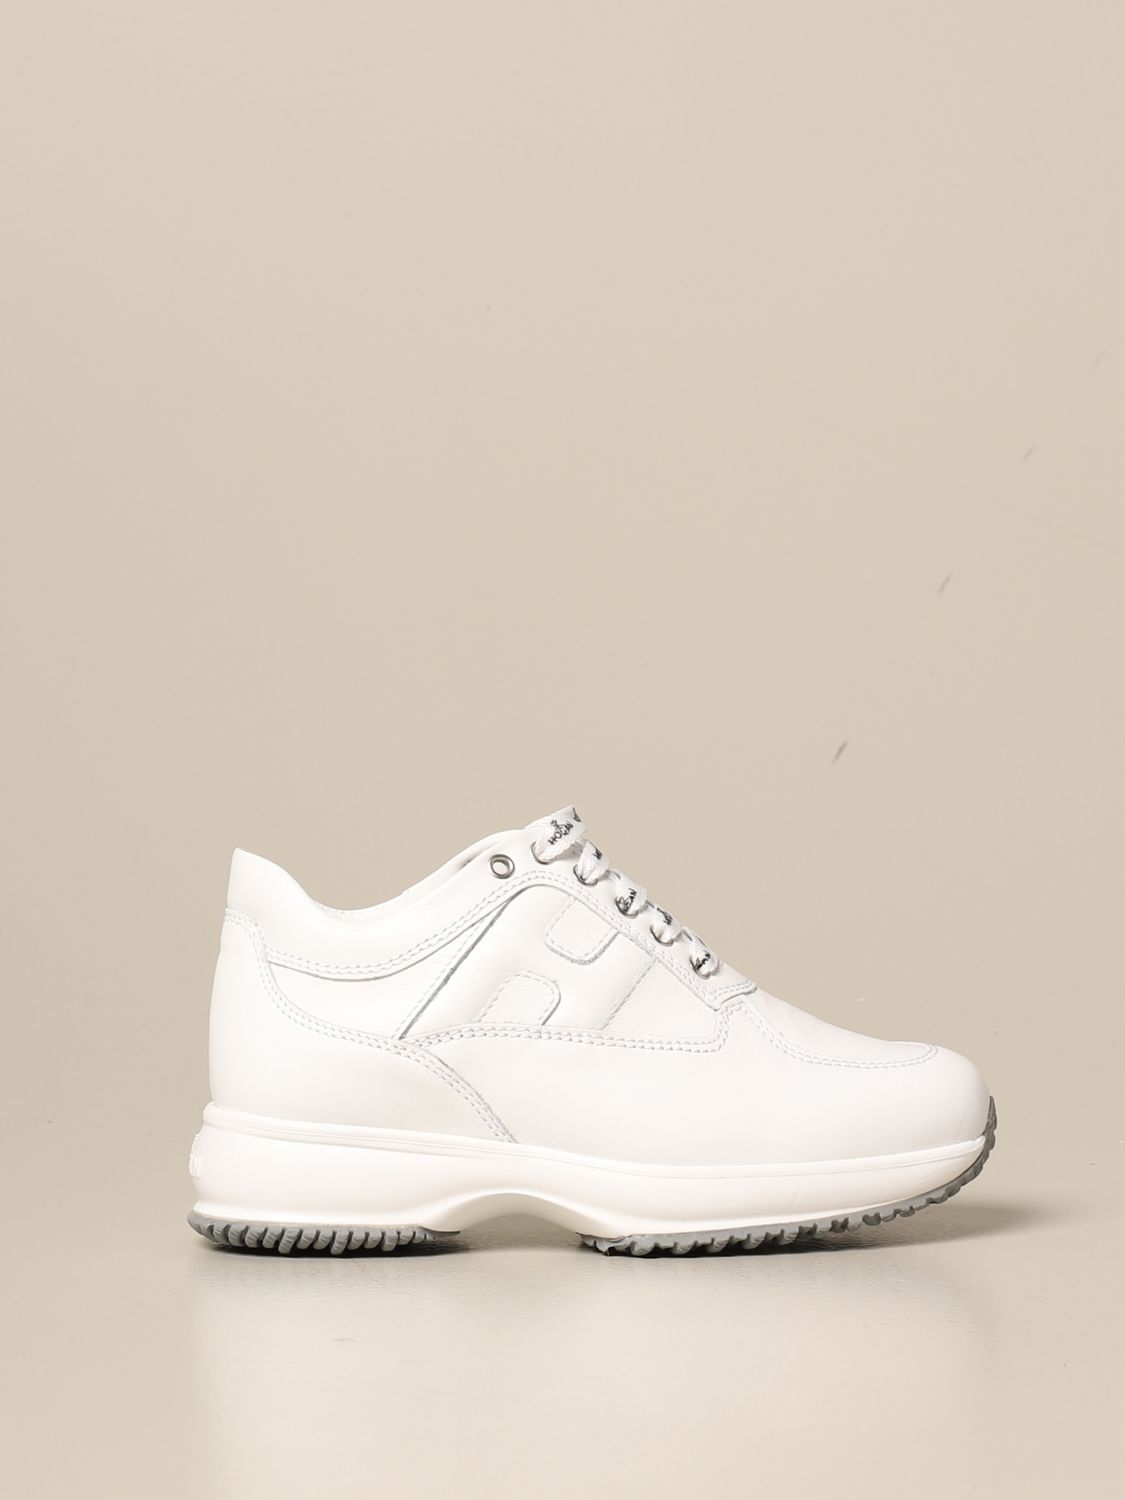 kids white leather shoes